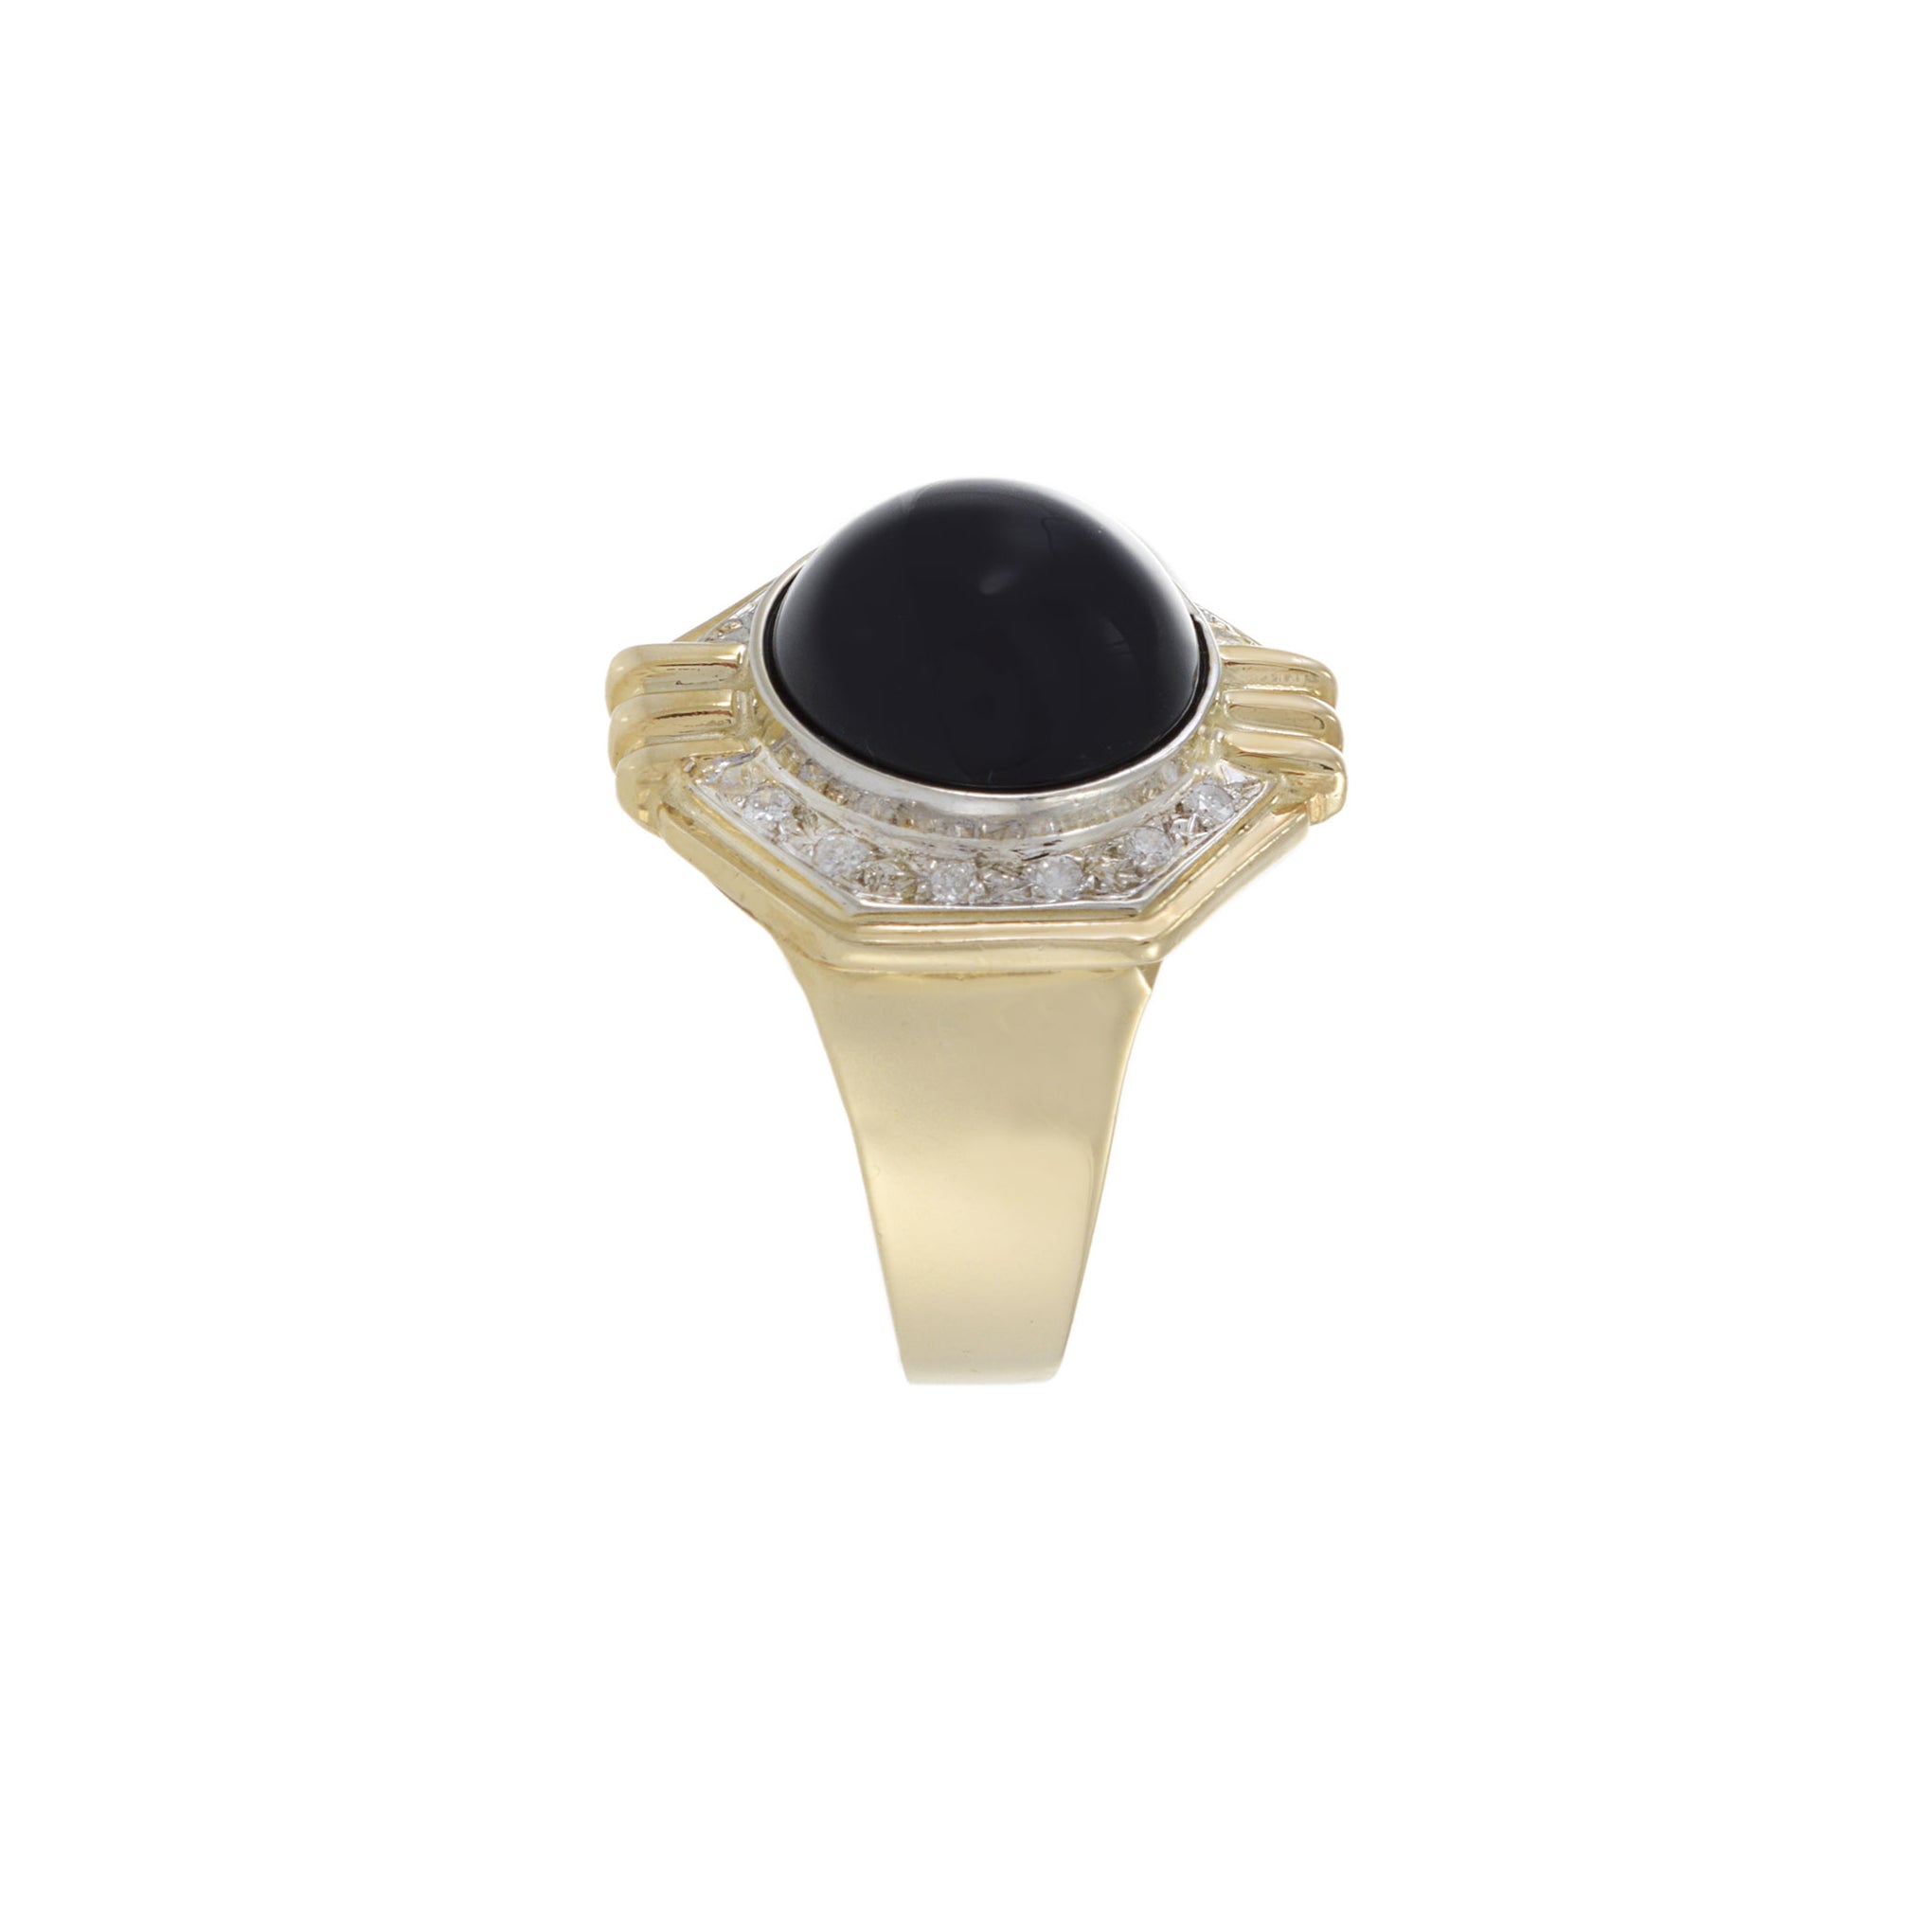 Vintage 1970s 14KT Yellow Gold Diamond and Black Onyx Ring